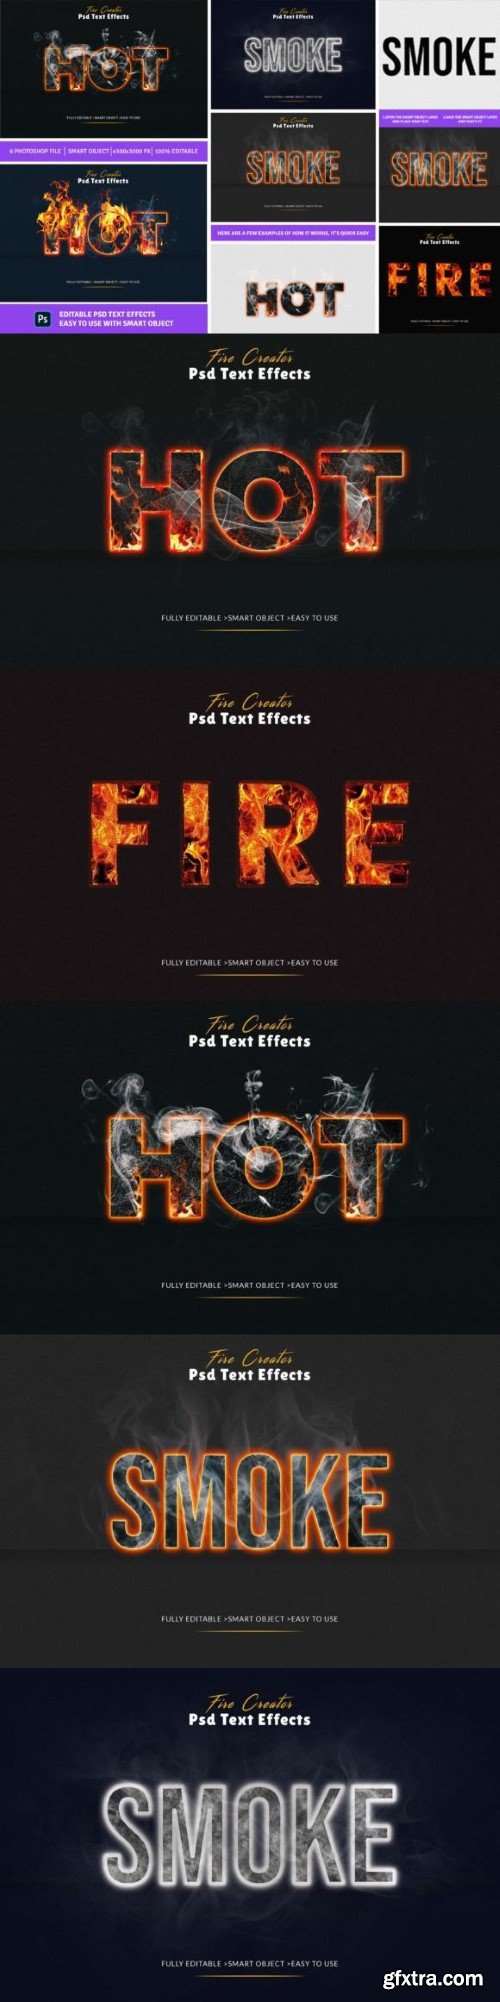 Realistic Fire Text Effects Creator